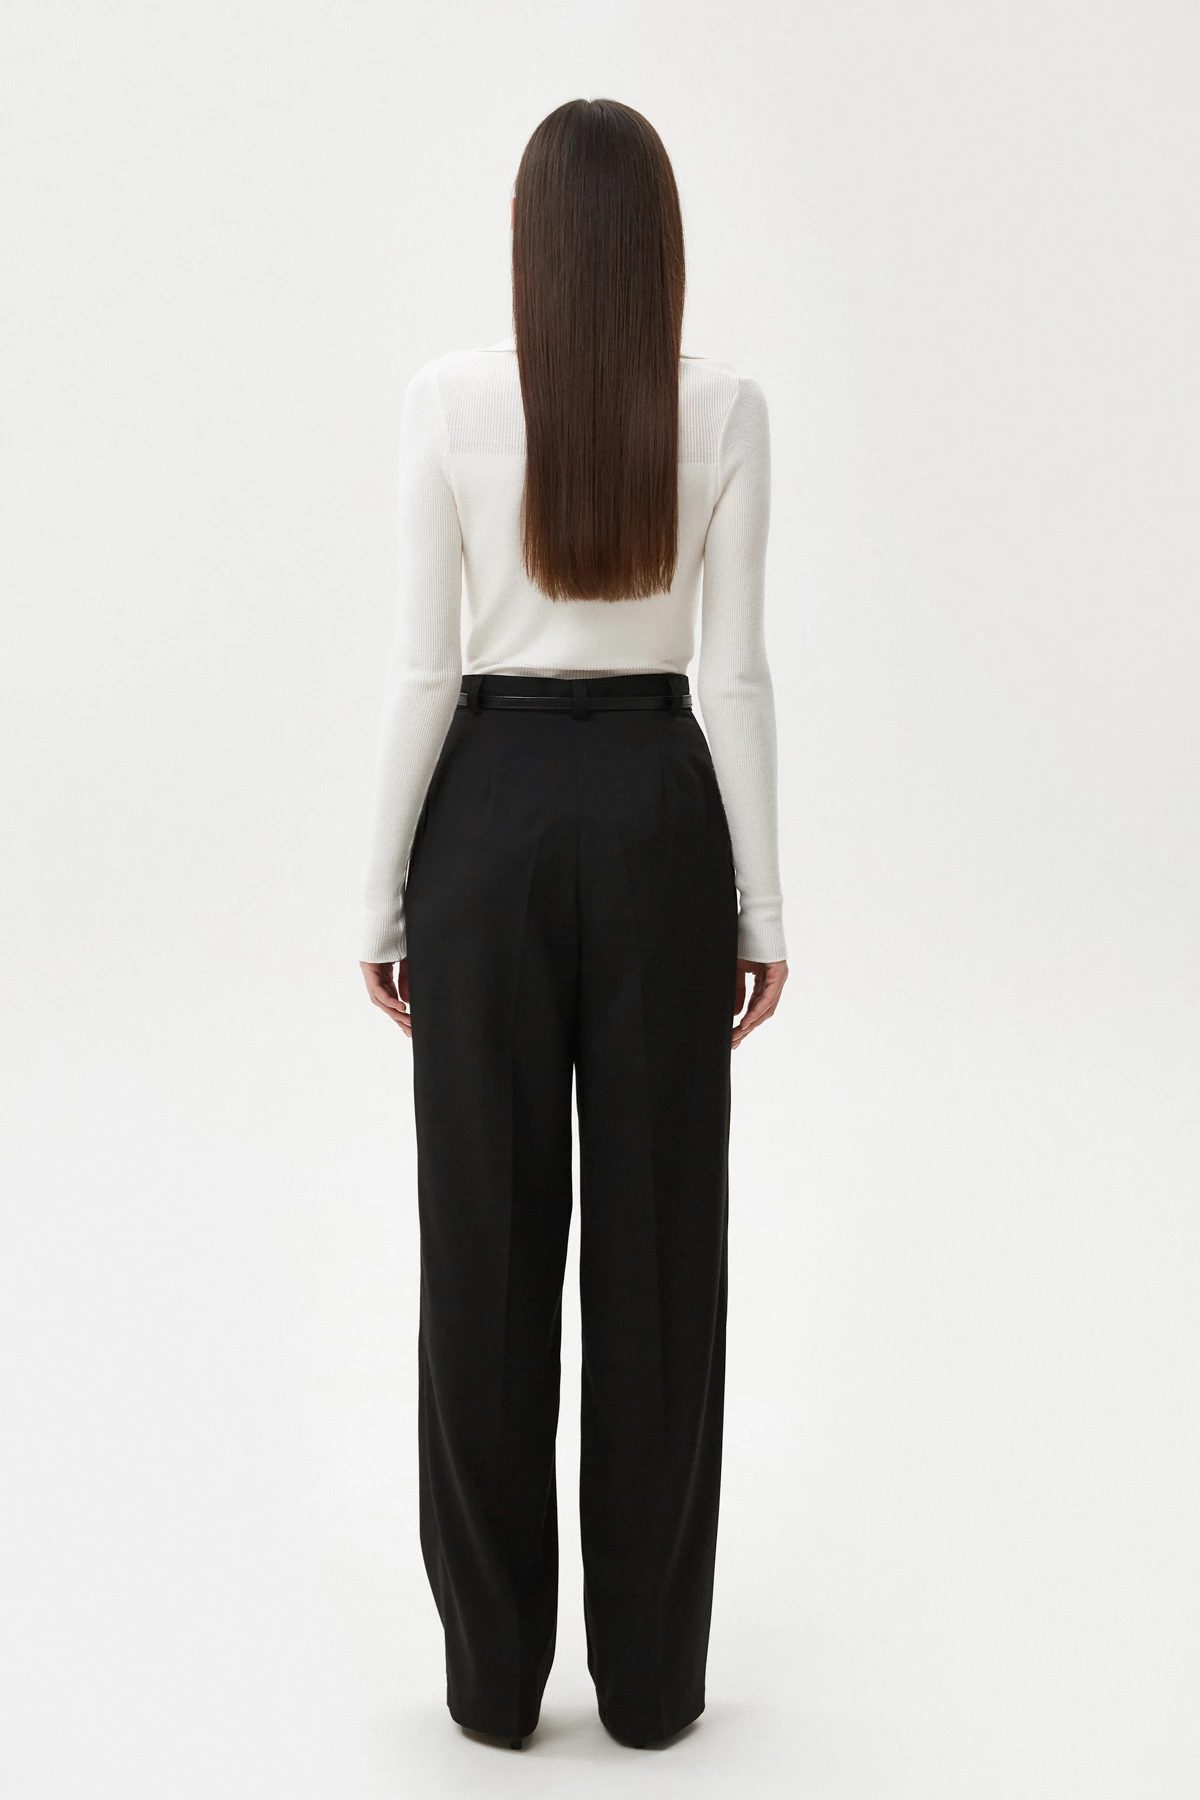 Black loose fit pants made of viscose suit fabric, photo 2